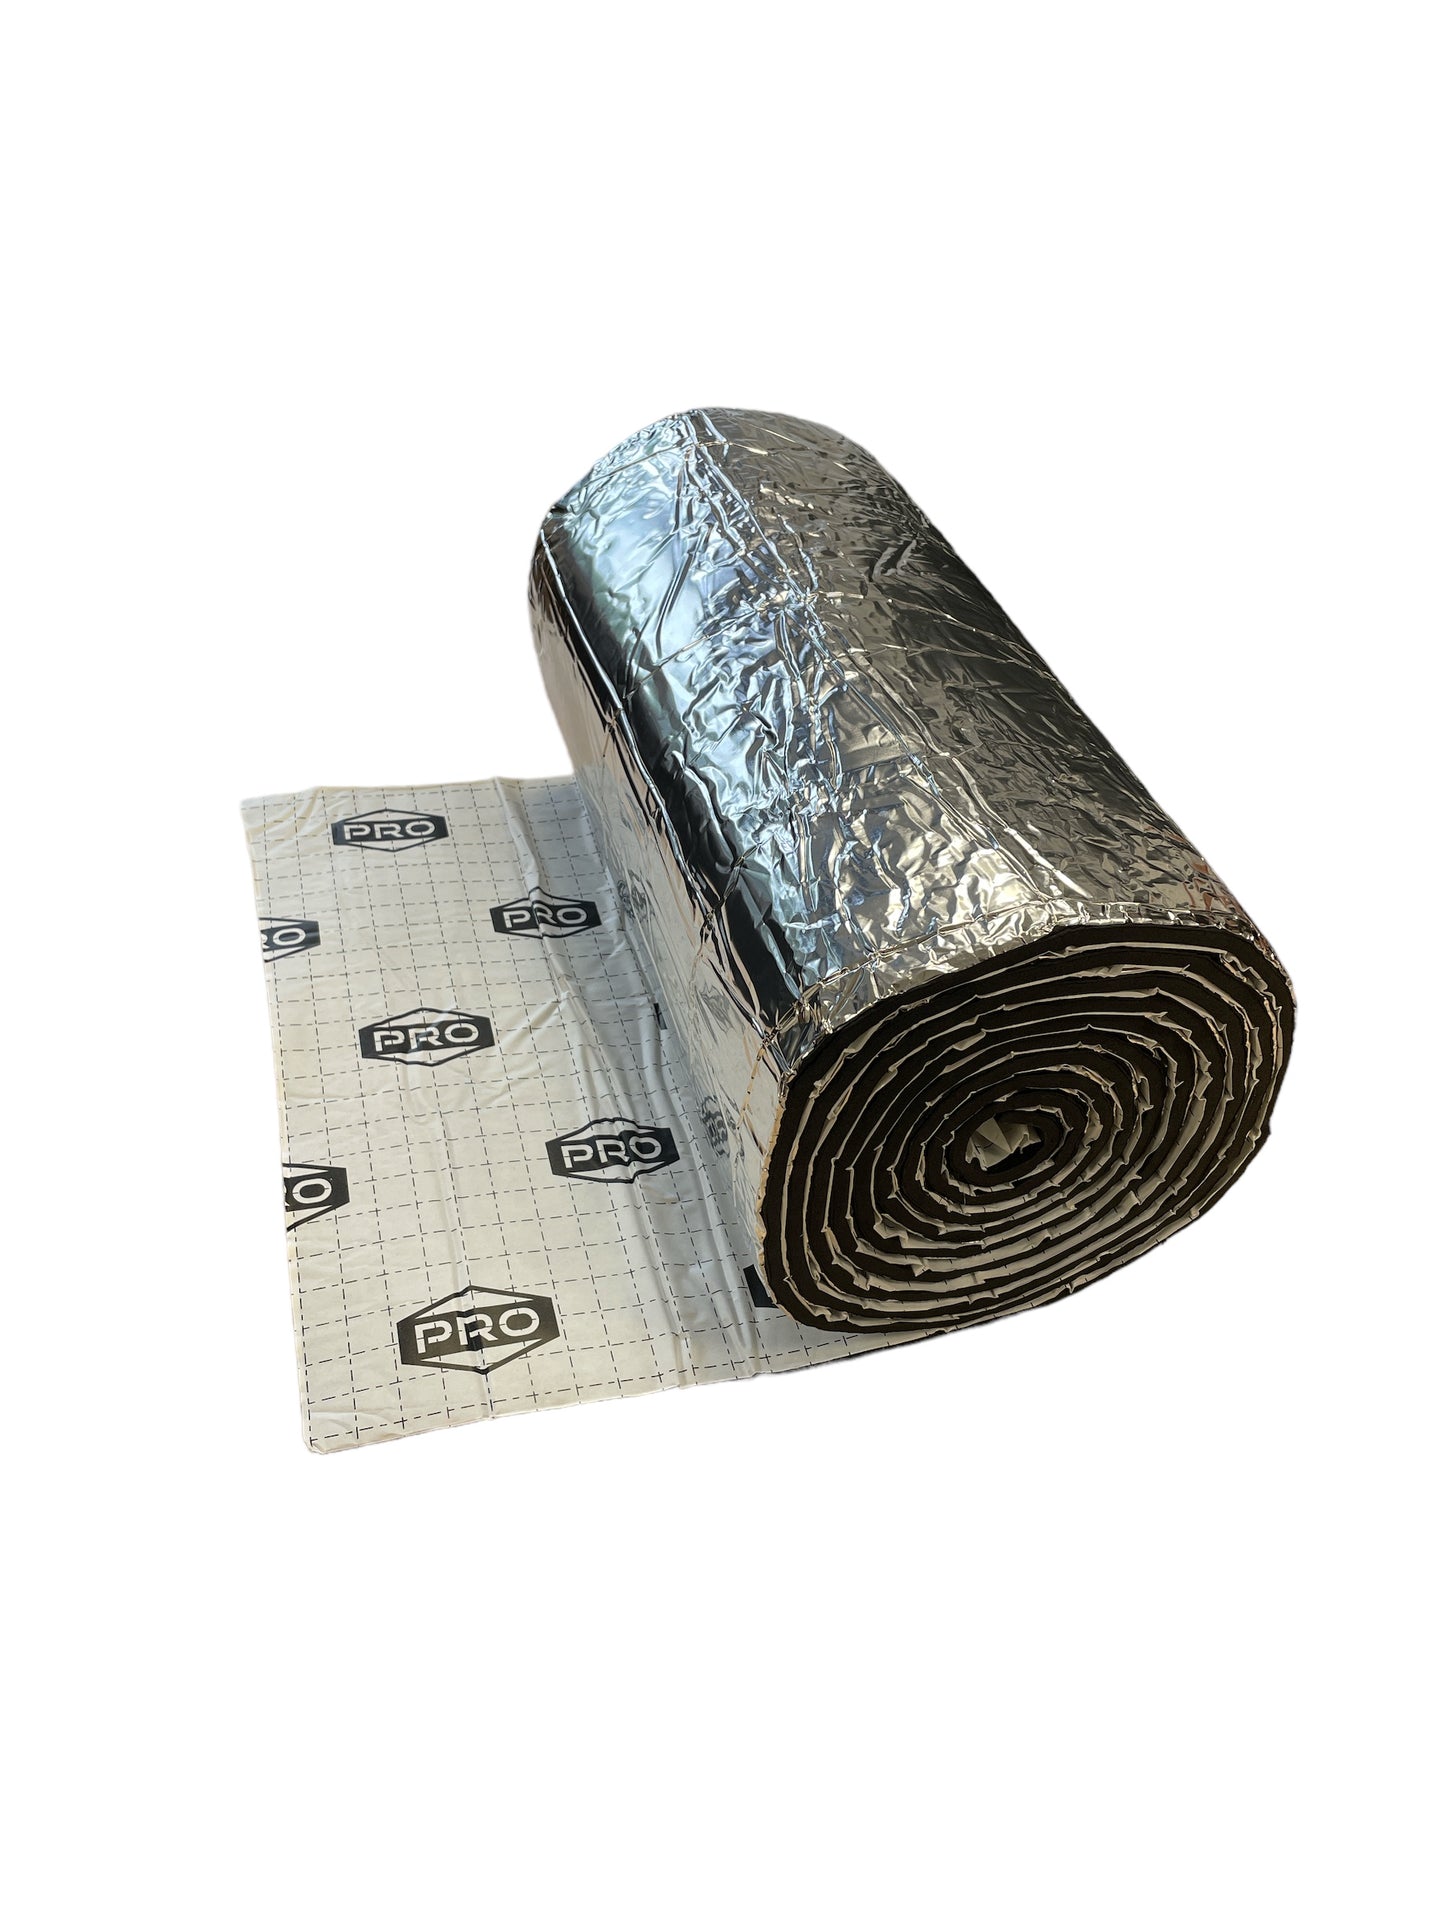 PRO® Thermo Rubber Foam with Foil 10mm Sound Absorbing Thermal Deadn Mat roll 50cm x 5m 2.5sqm